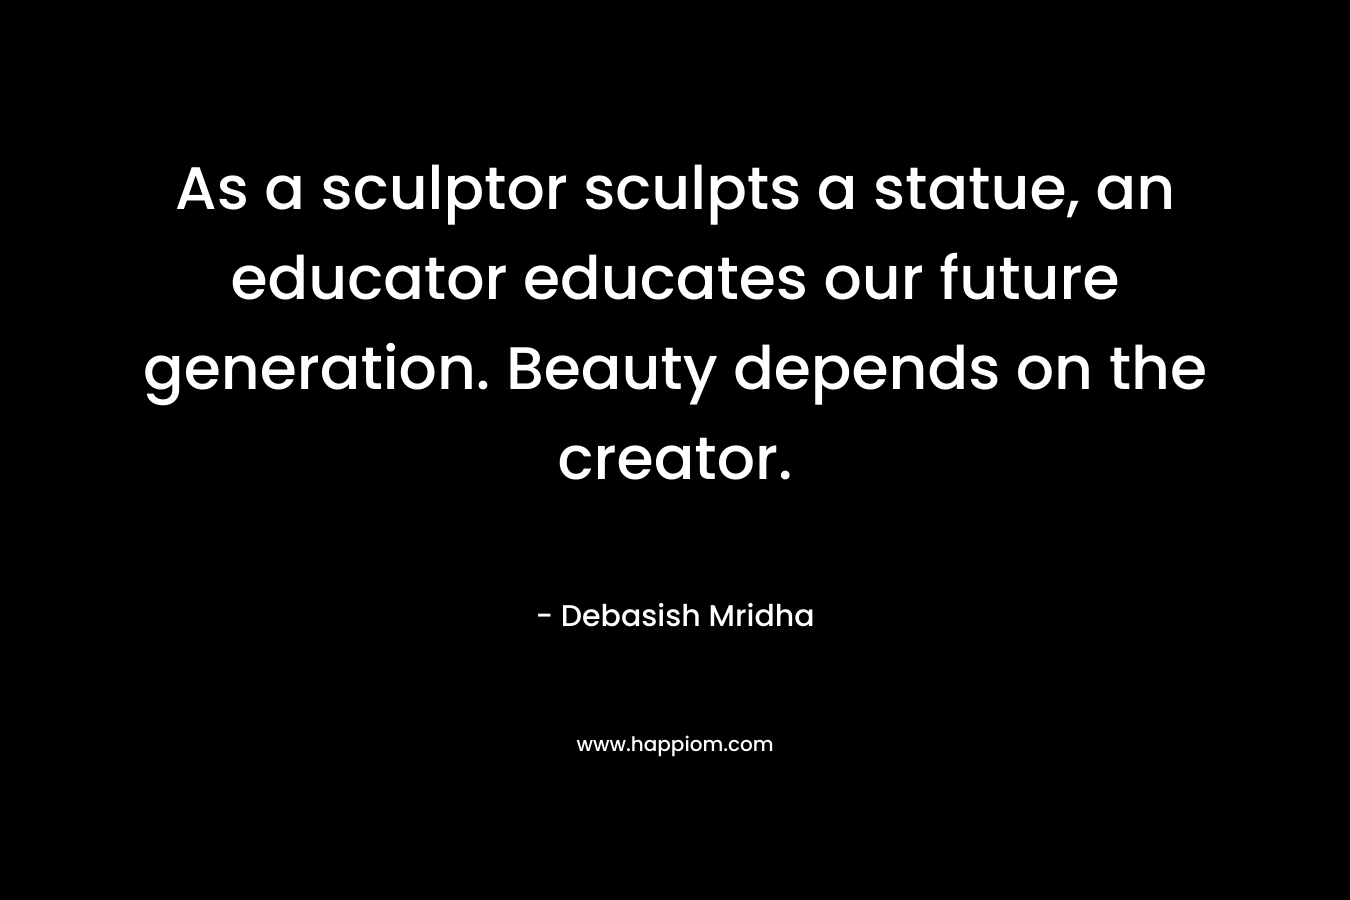 As a sculptor sculpts a statue, an educator educates our future generation. Beauty depends on the creator.